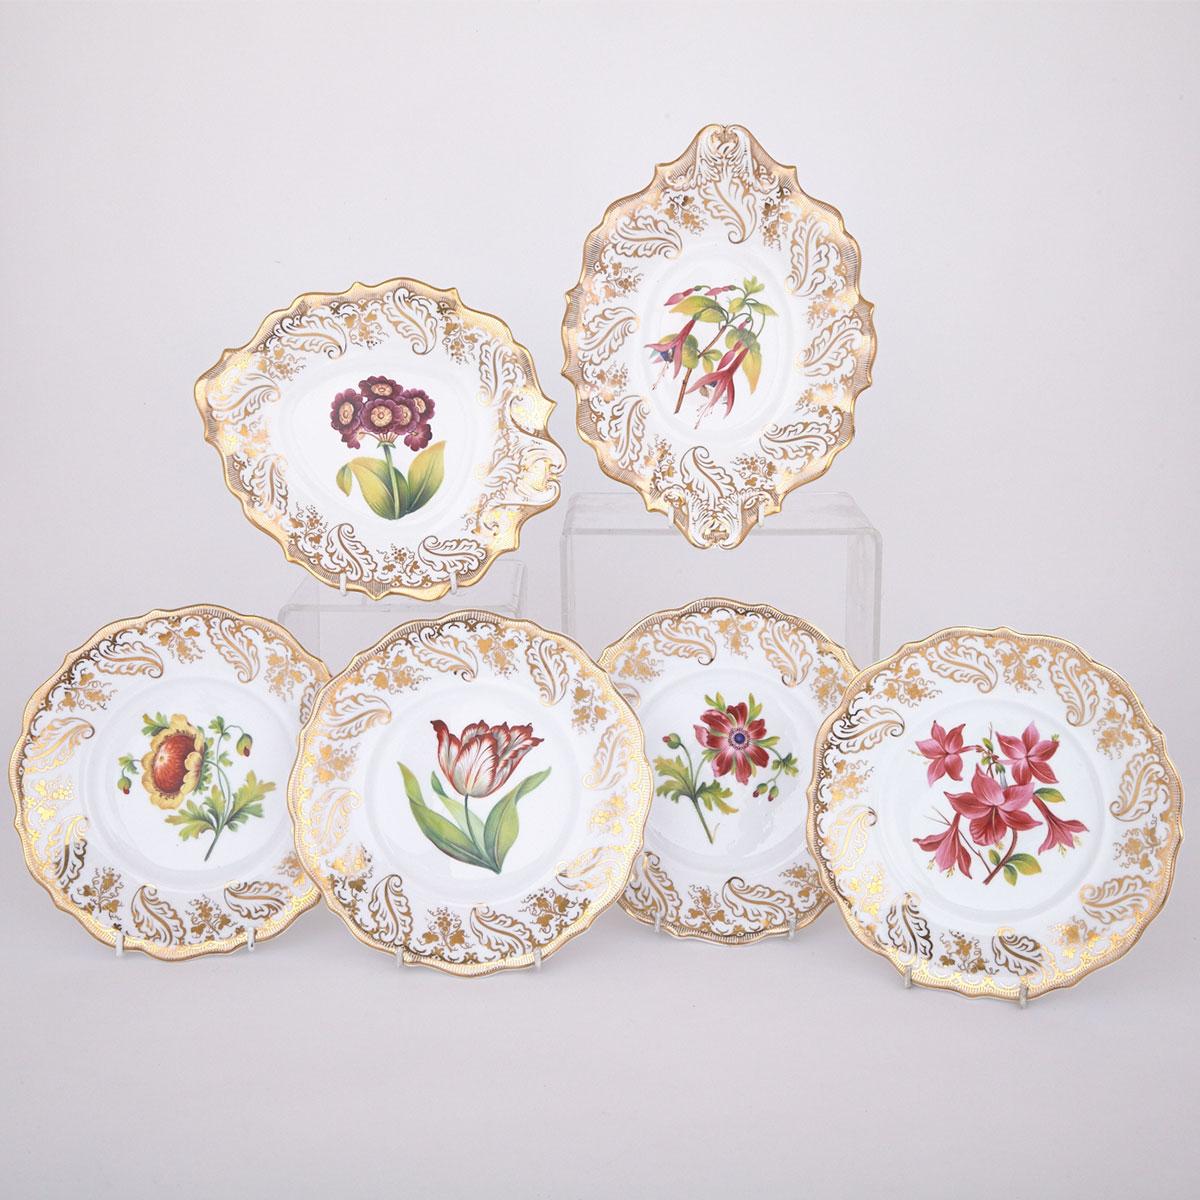 Four English Porcelain Botanical Dessert Plates and Two Serving Dishes, mid-19th century